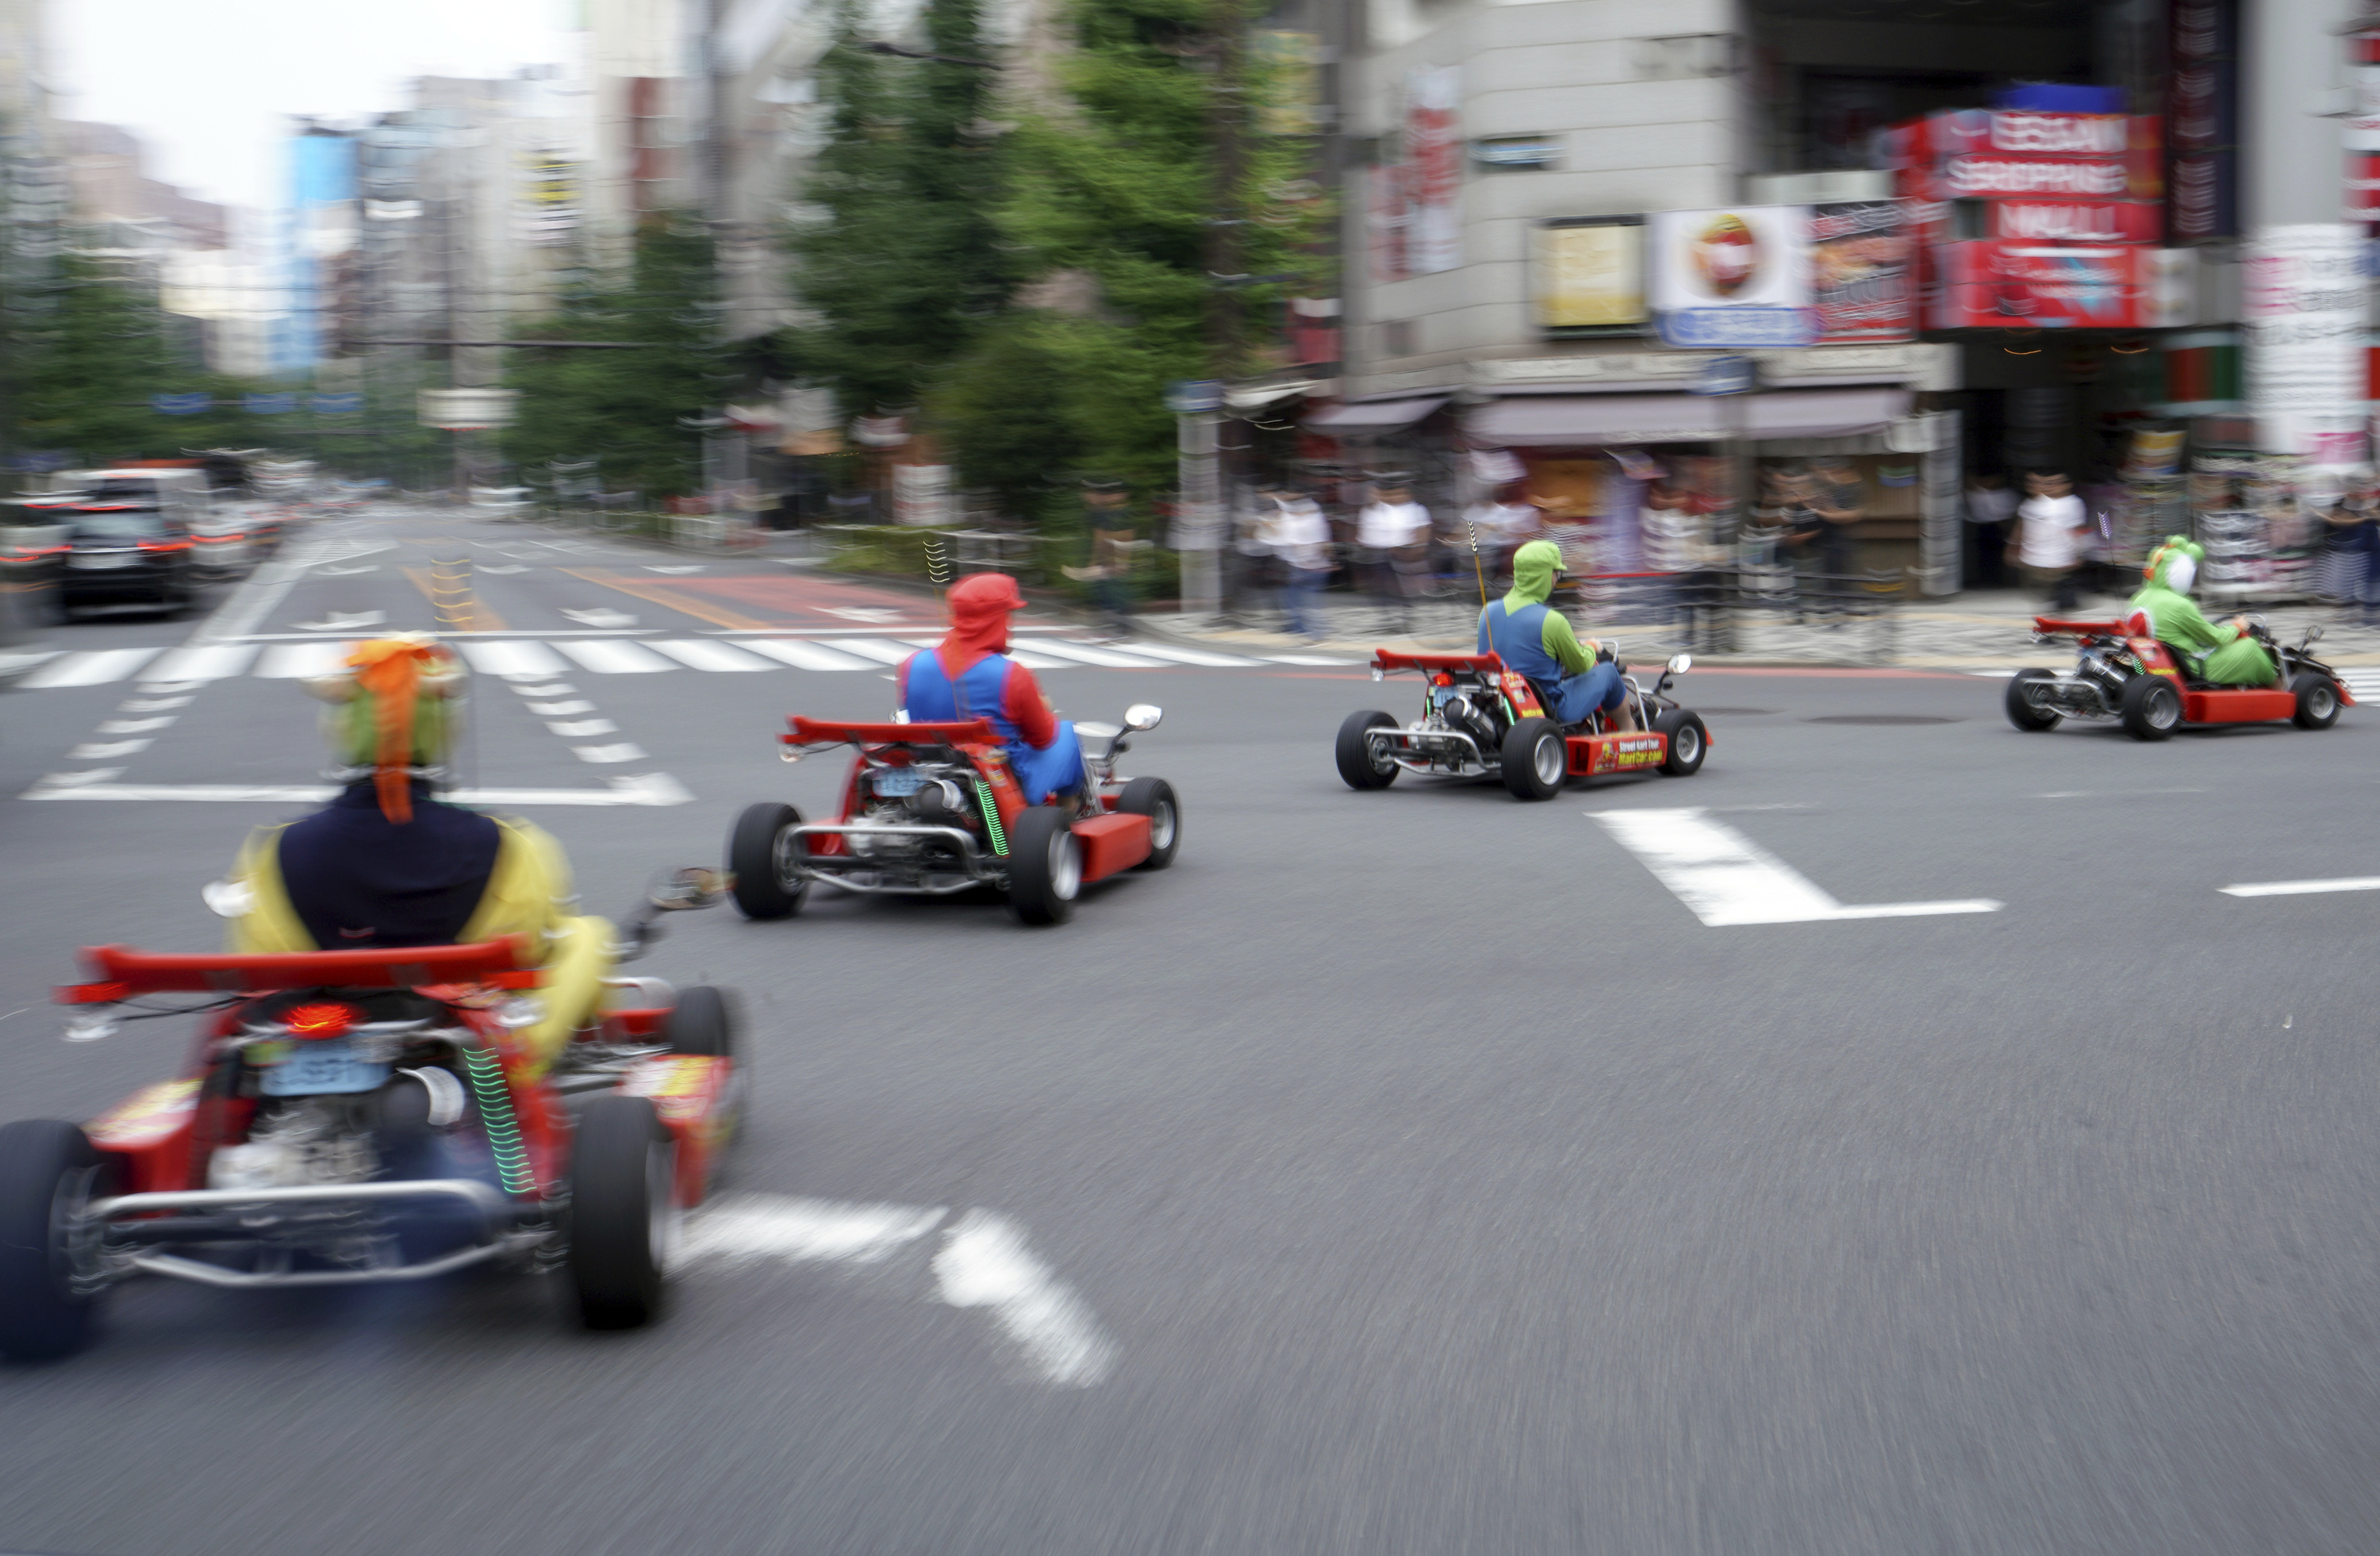 Tourists drive carts on a street in the Akihabara shopping and tourist district of Tokyo 